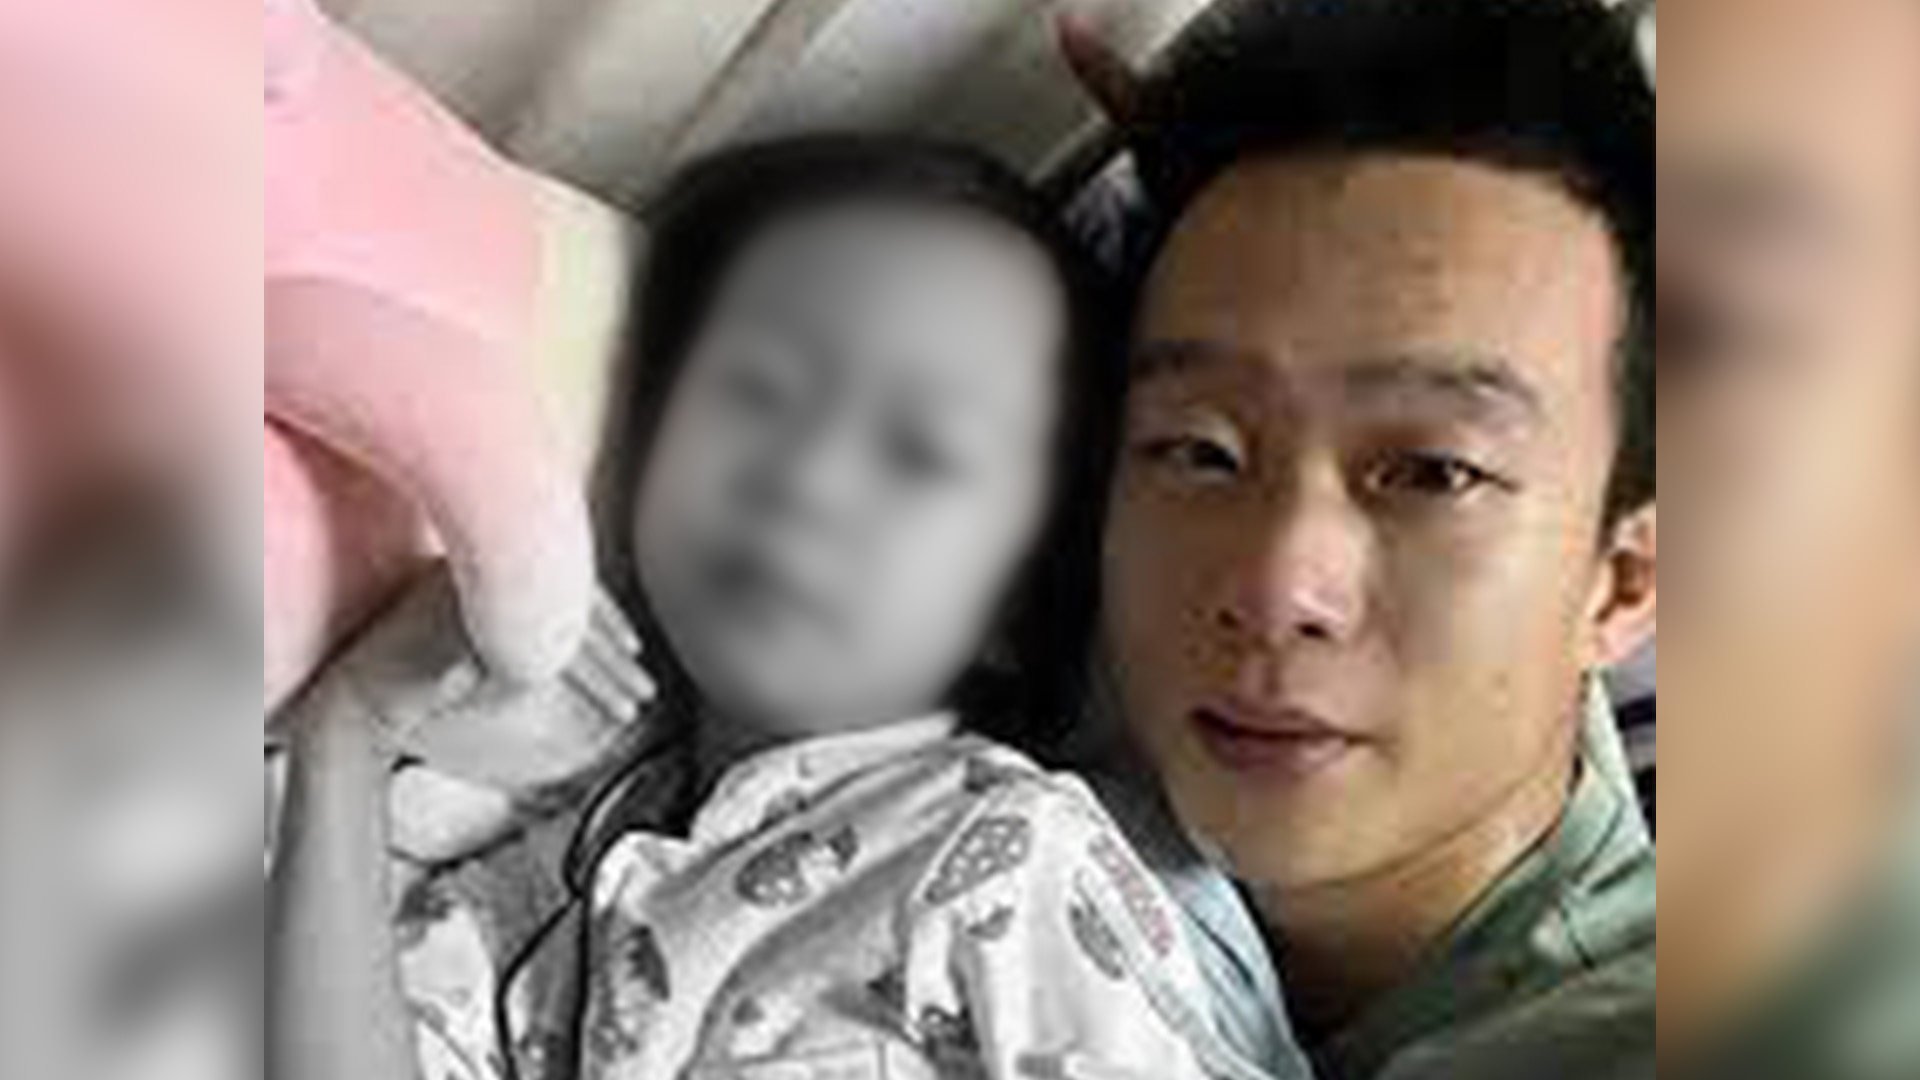 A devoted single father in China who tried to save his five-year-old daughter’s life by donating part of his liver to her has received a huge outpouring of sympathy on mainland social media following the tragic death of the little girl. Photo: SCMP composite/Douyin